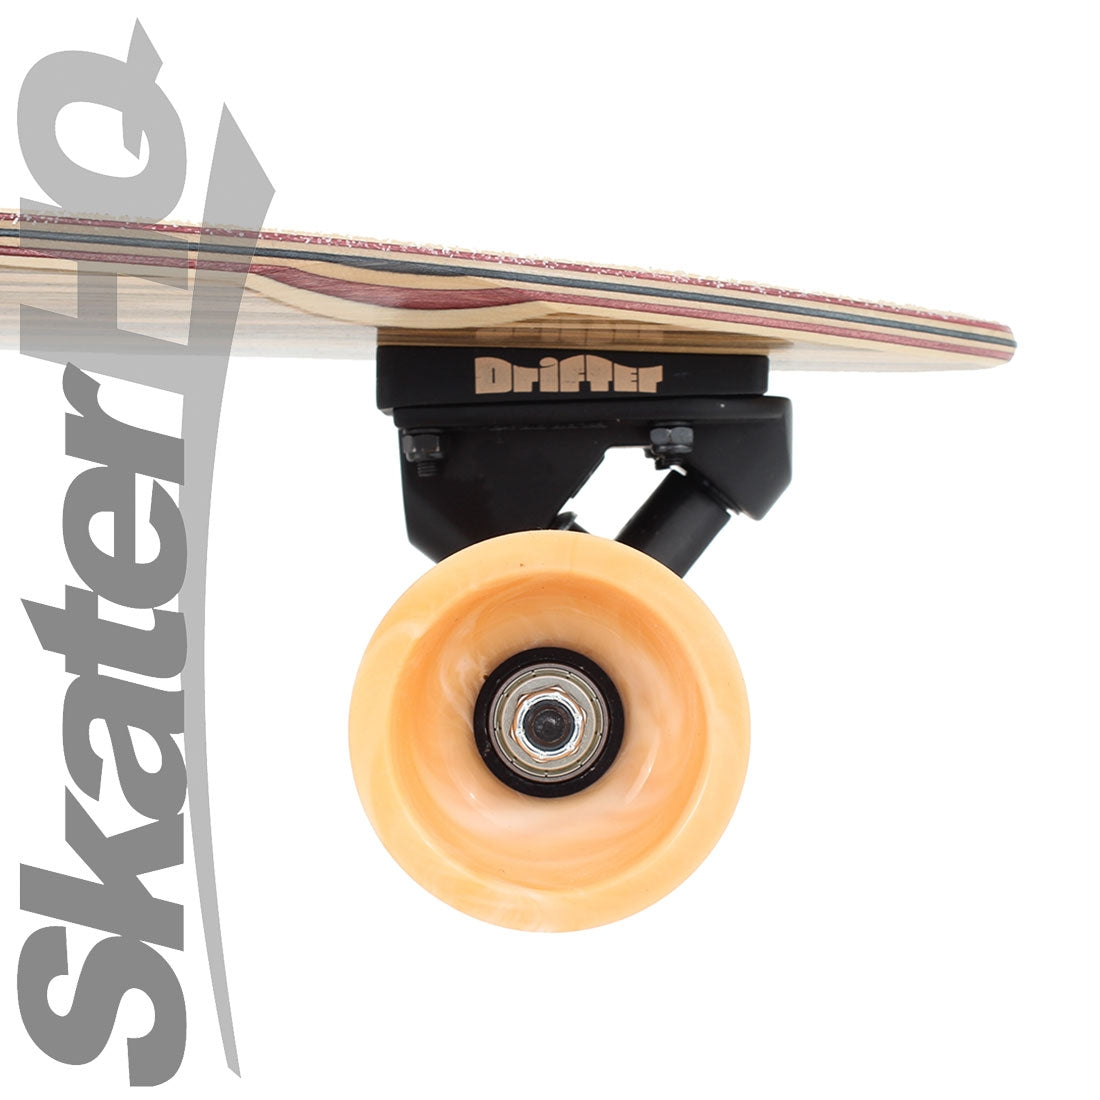 Drifter Pinner 40 Complete - Timber Skateboard Completes Longboards